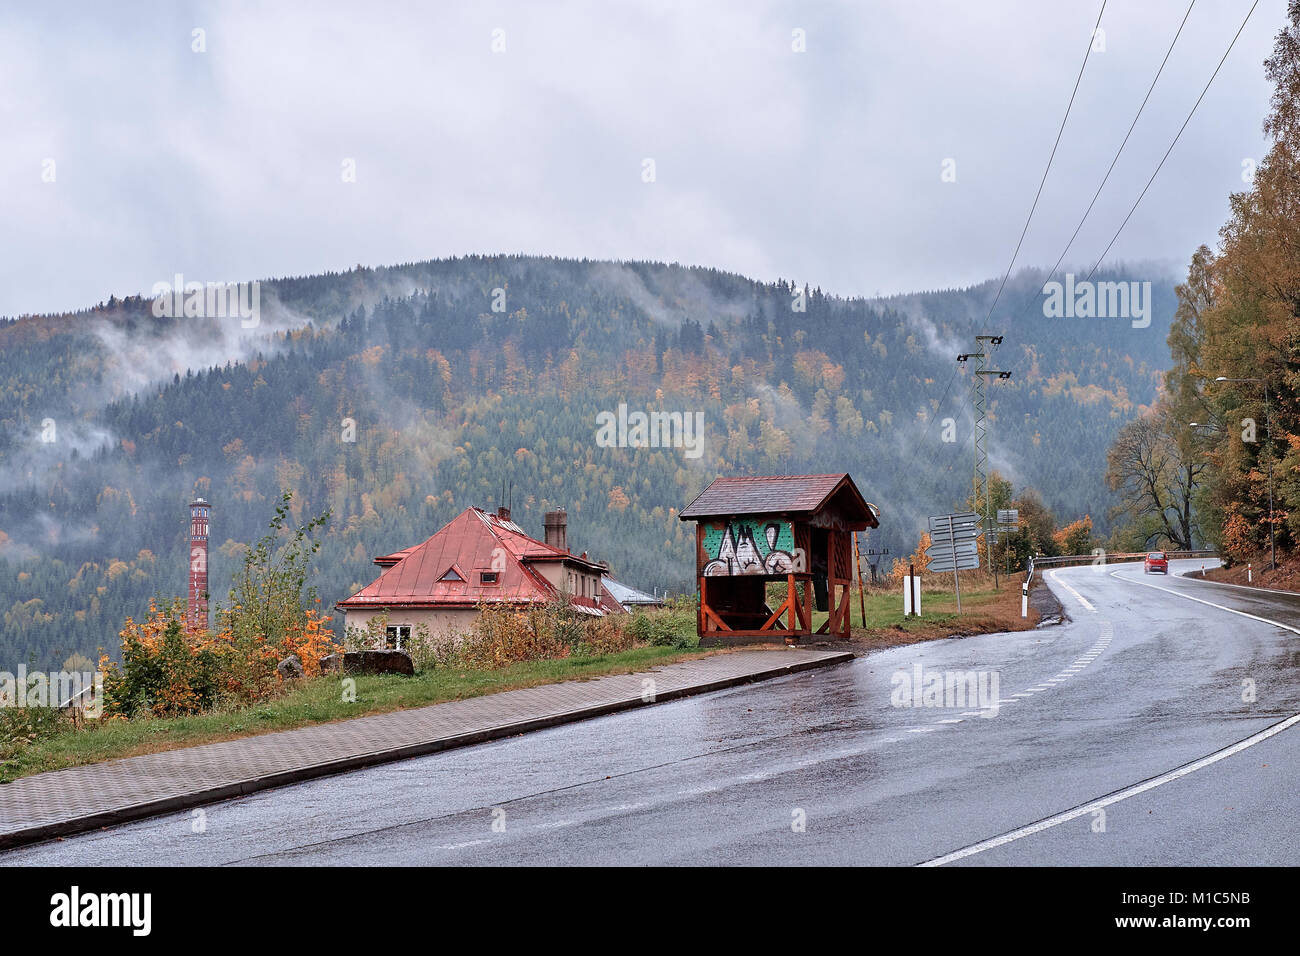 Fog and mist over the pine mountain forest with traditional old village houses, a red car on the road and a fancy bus stop Stock Photo